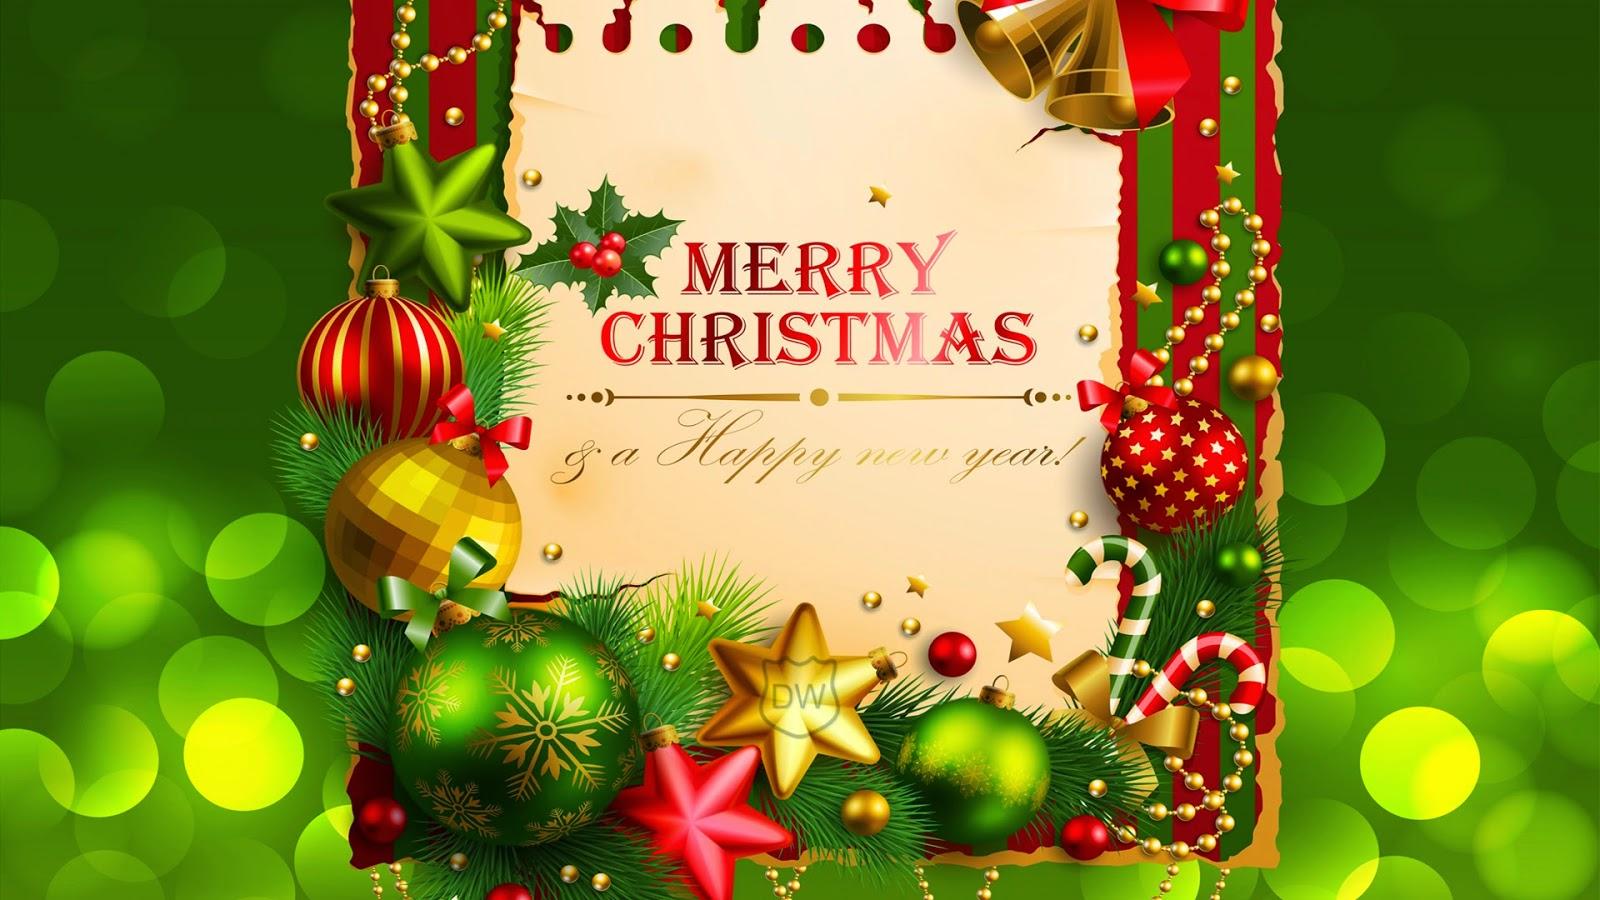 Happy New Year Text Message 33 Christmas Image 2018